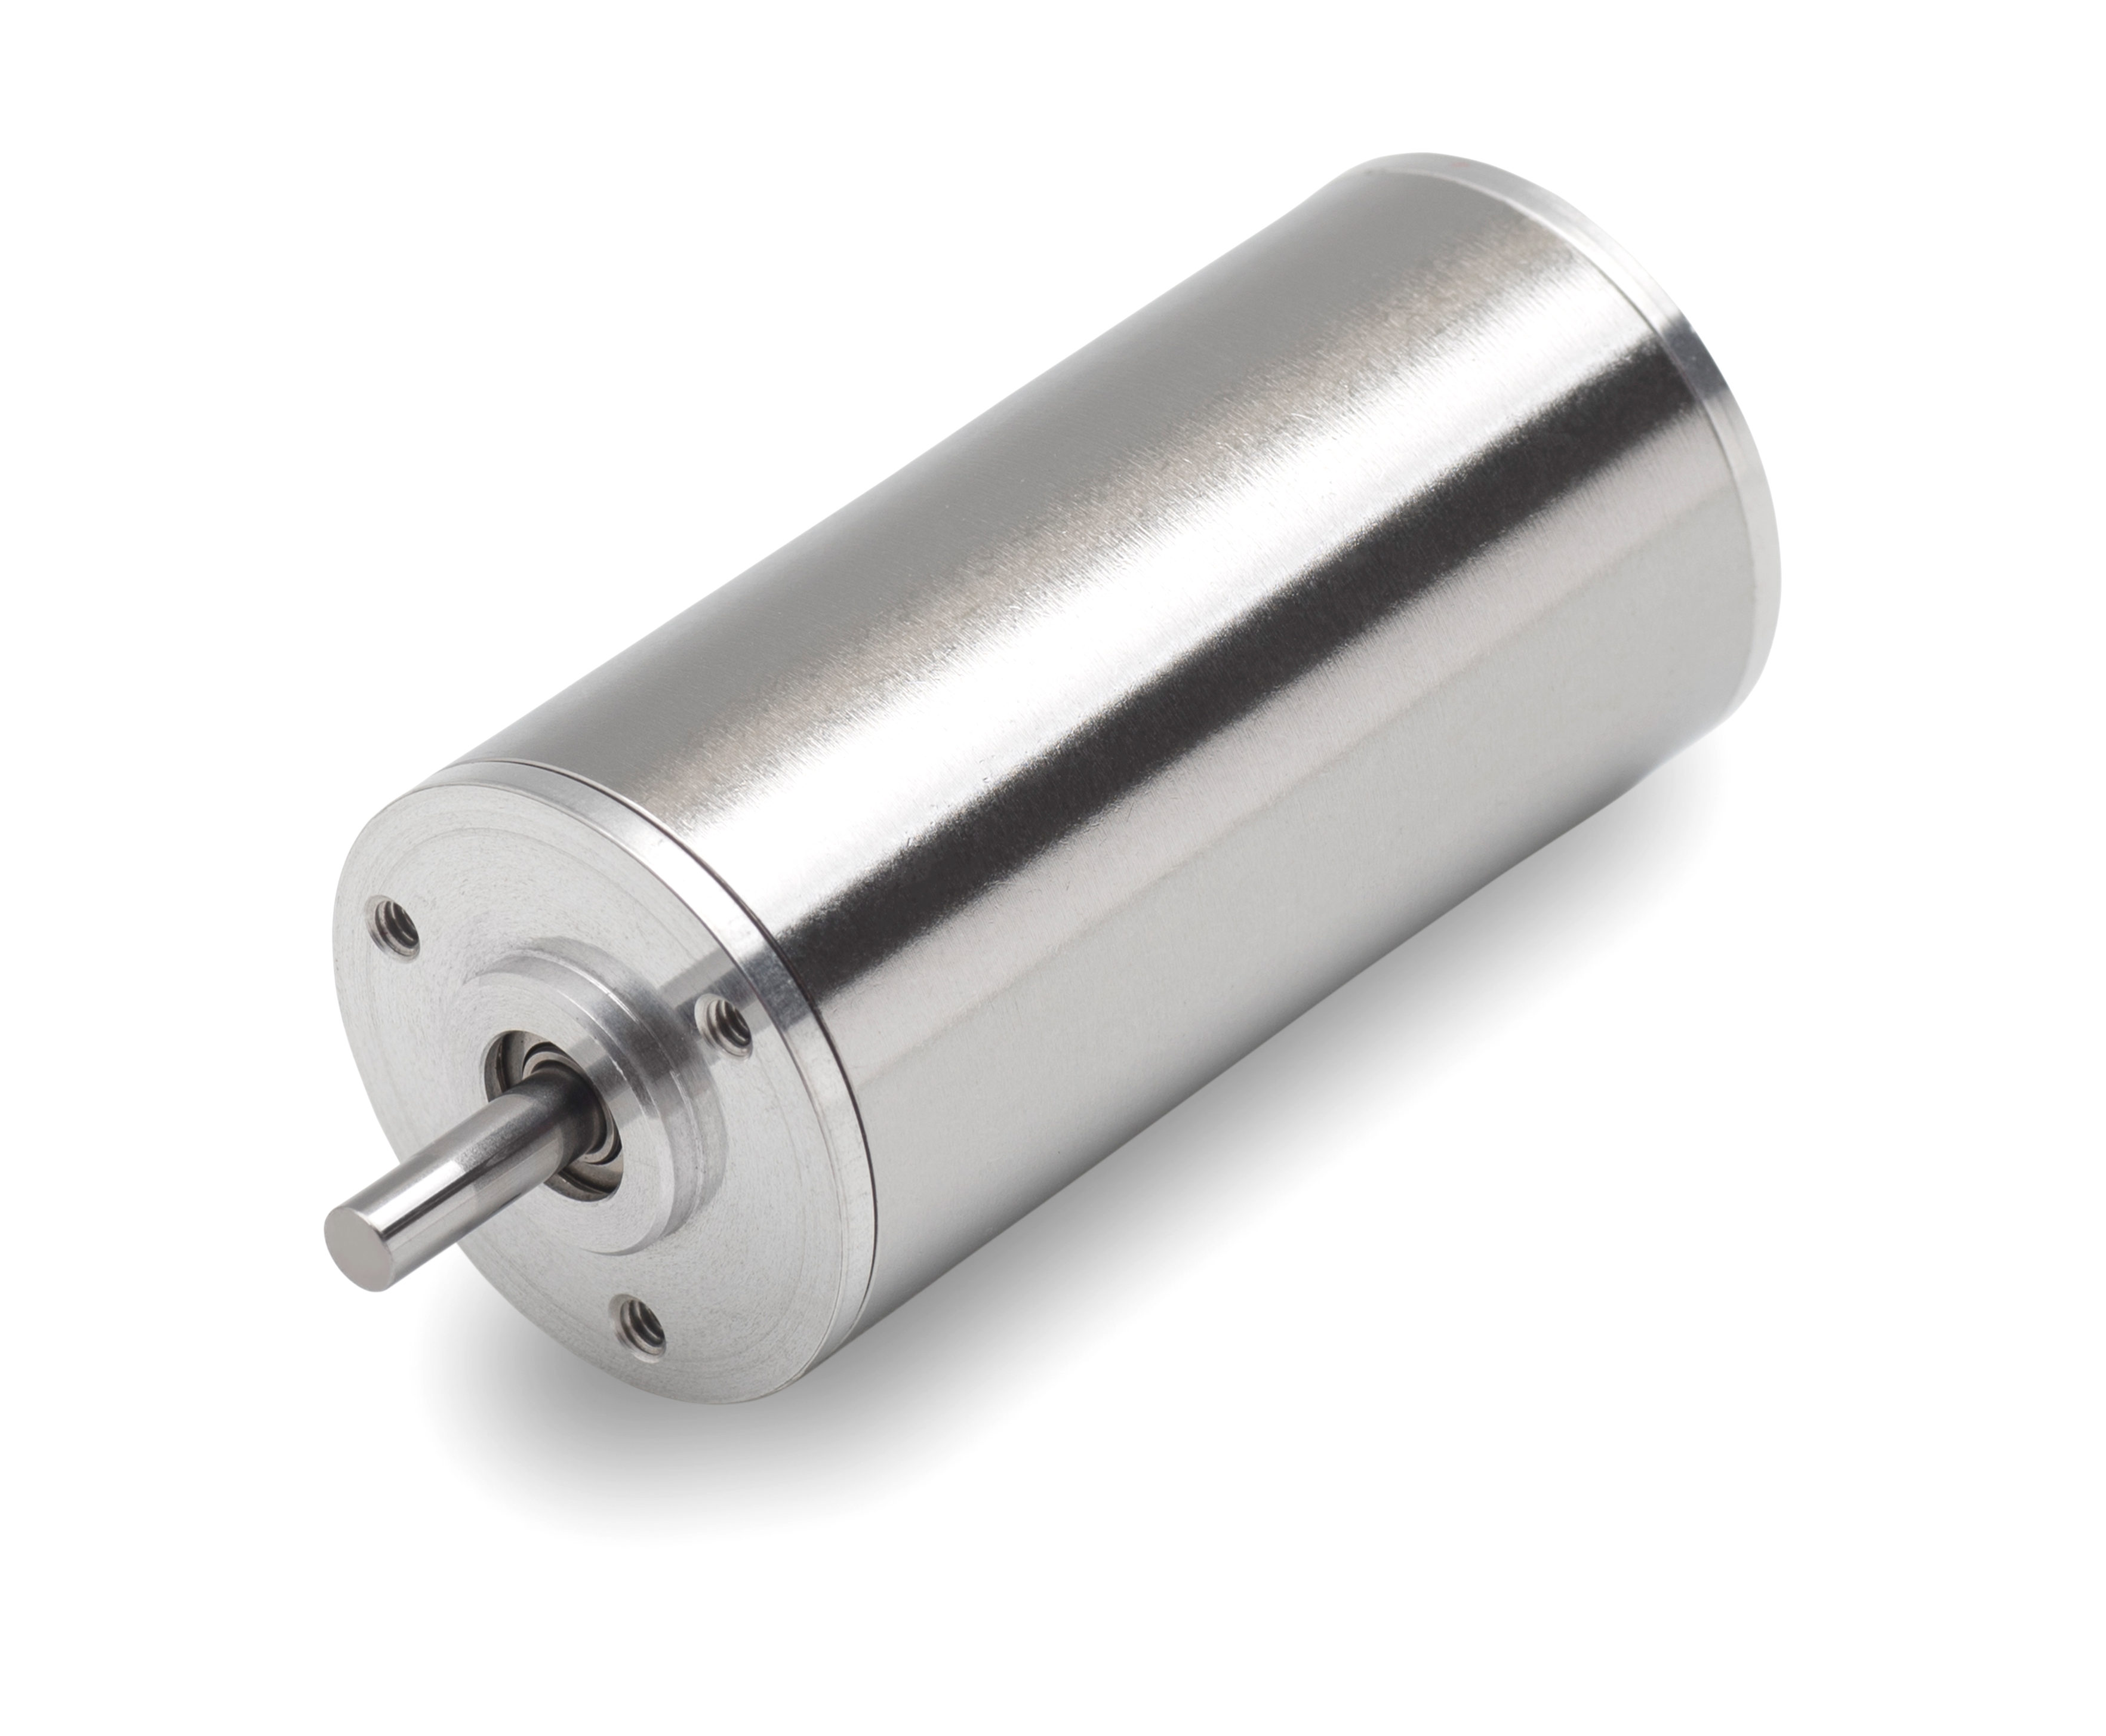 22ECA60 Brushless DC Motor is ideal for small and medium bone surgical hand tools.